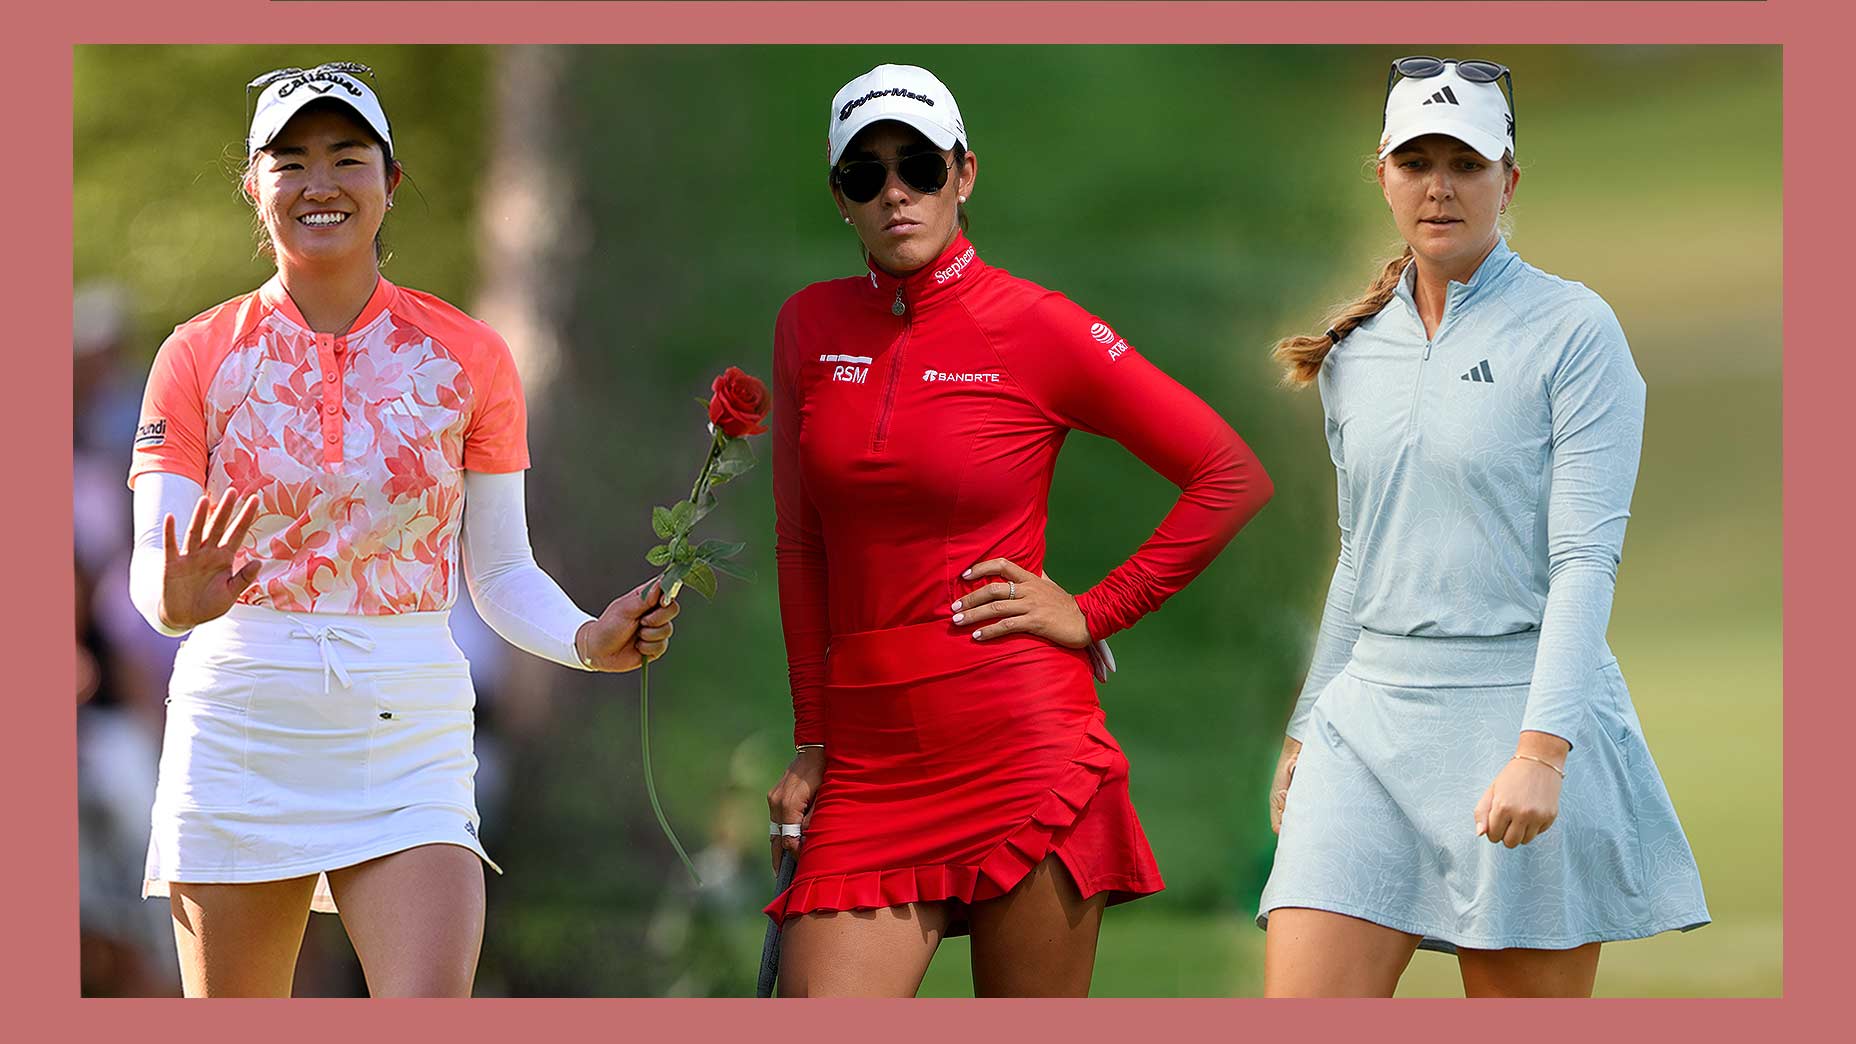 Women's golf skorts for fashionable and functional ladies on the move